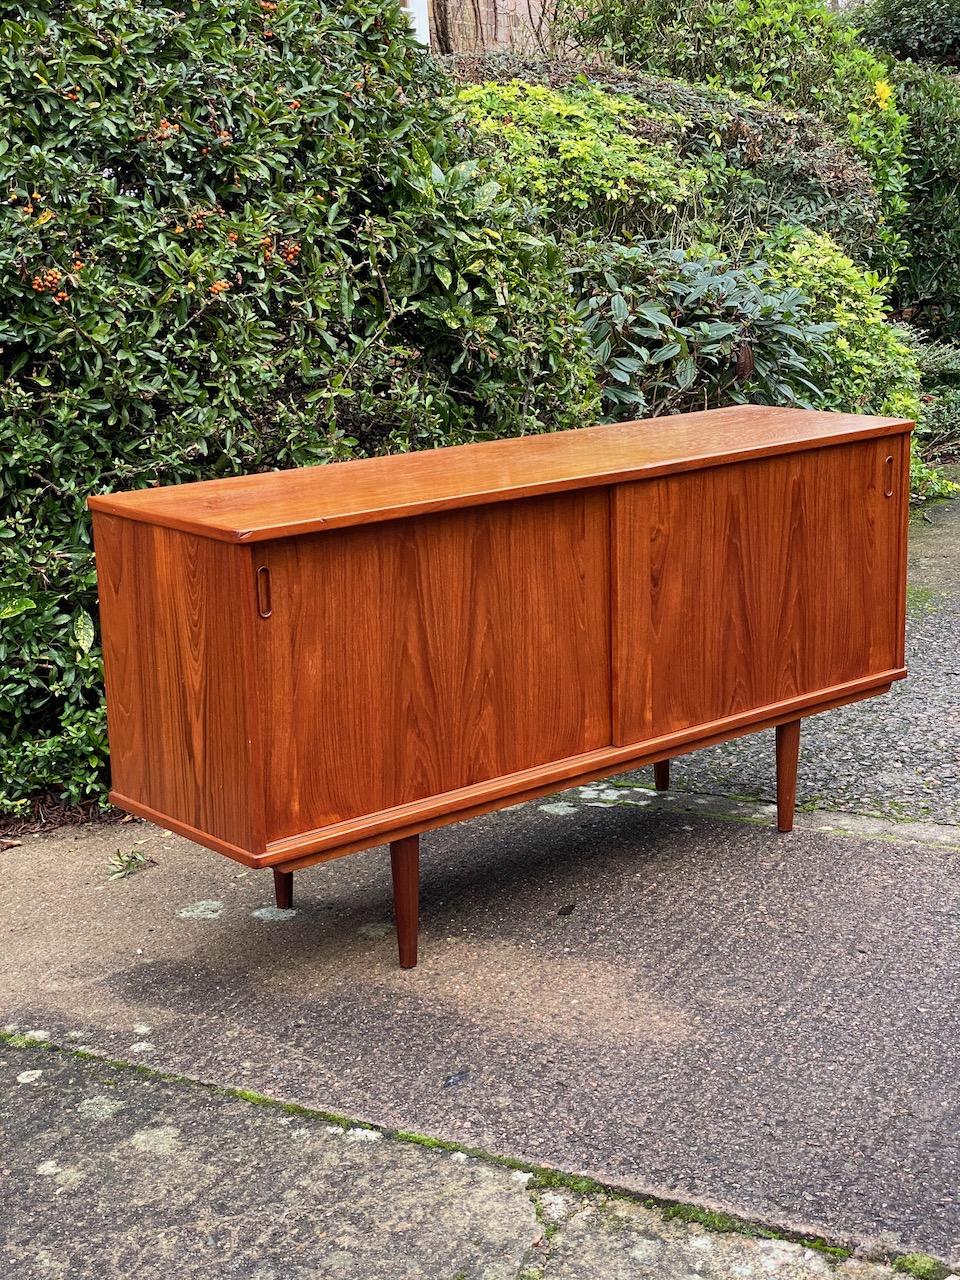 Dyrlund teak sideboard credenza midcentury Danish, circa 1970s.

Magnificent Mid-Century Modern Danish design Dyrlund teak sideboard Denmark circa 1970, the rectangular top over two cupboard with sliding doors and internal shelving, the right side